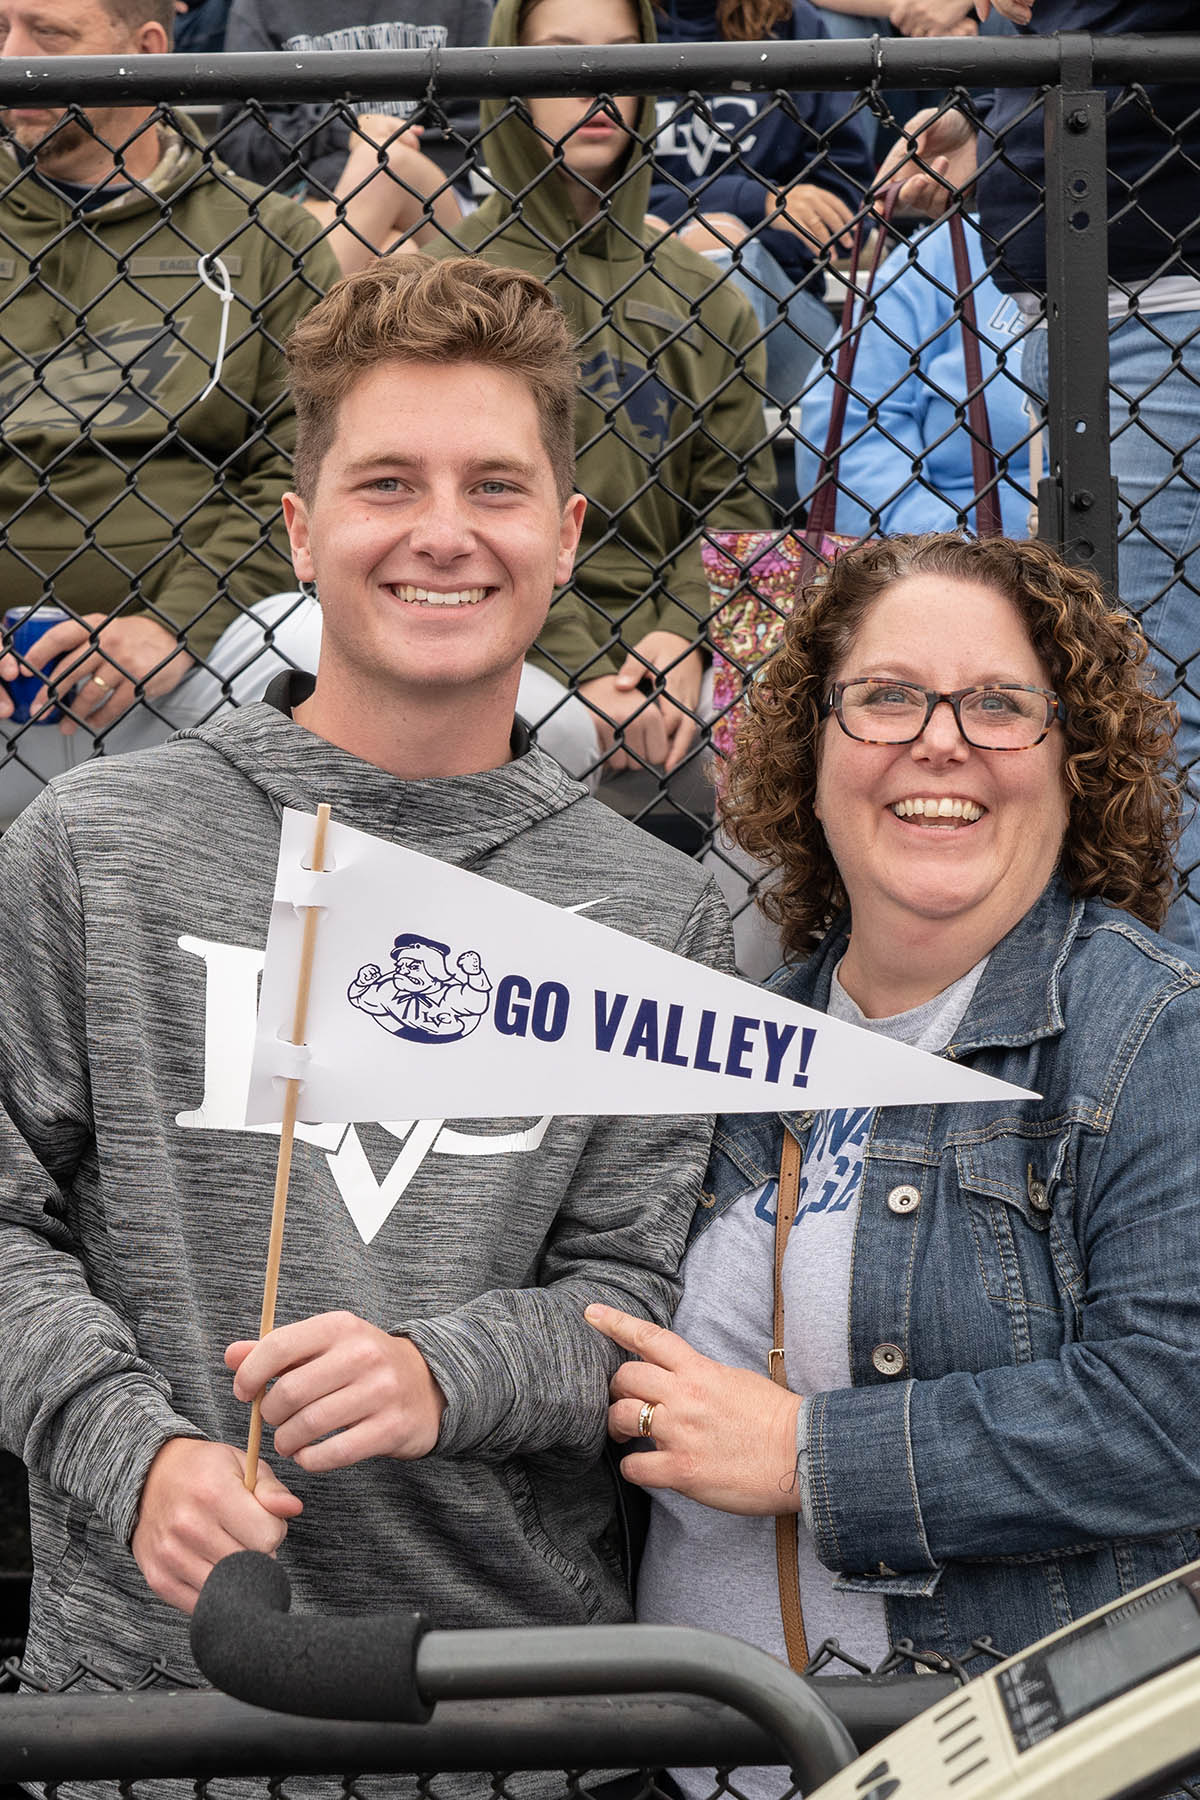 Student and parent at LVC sports game